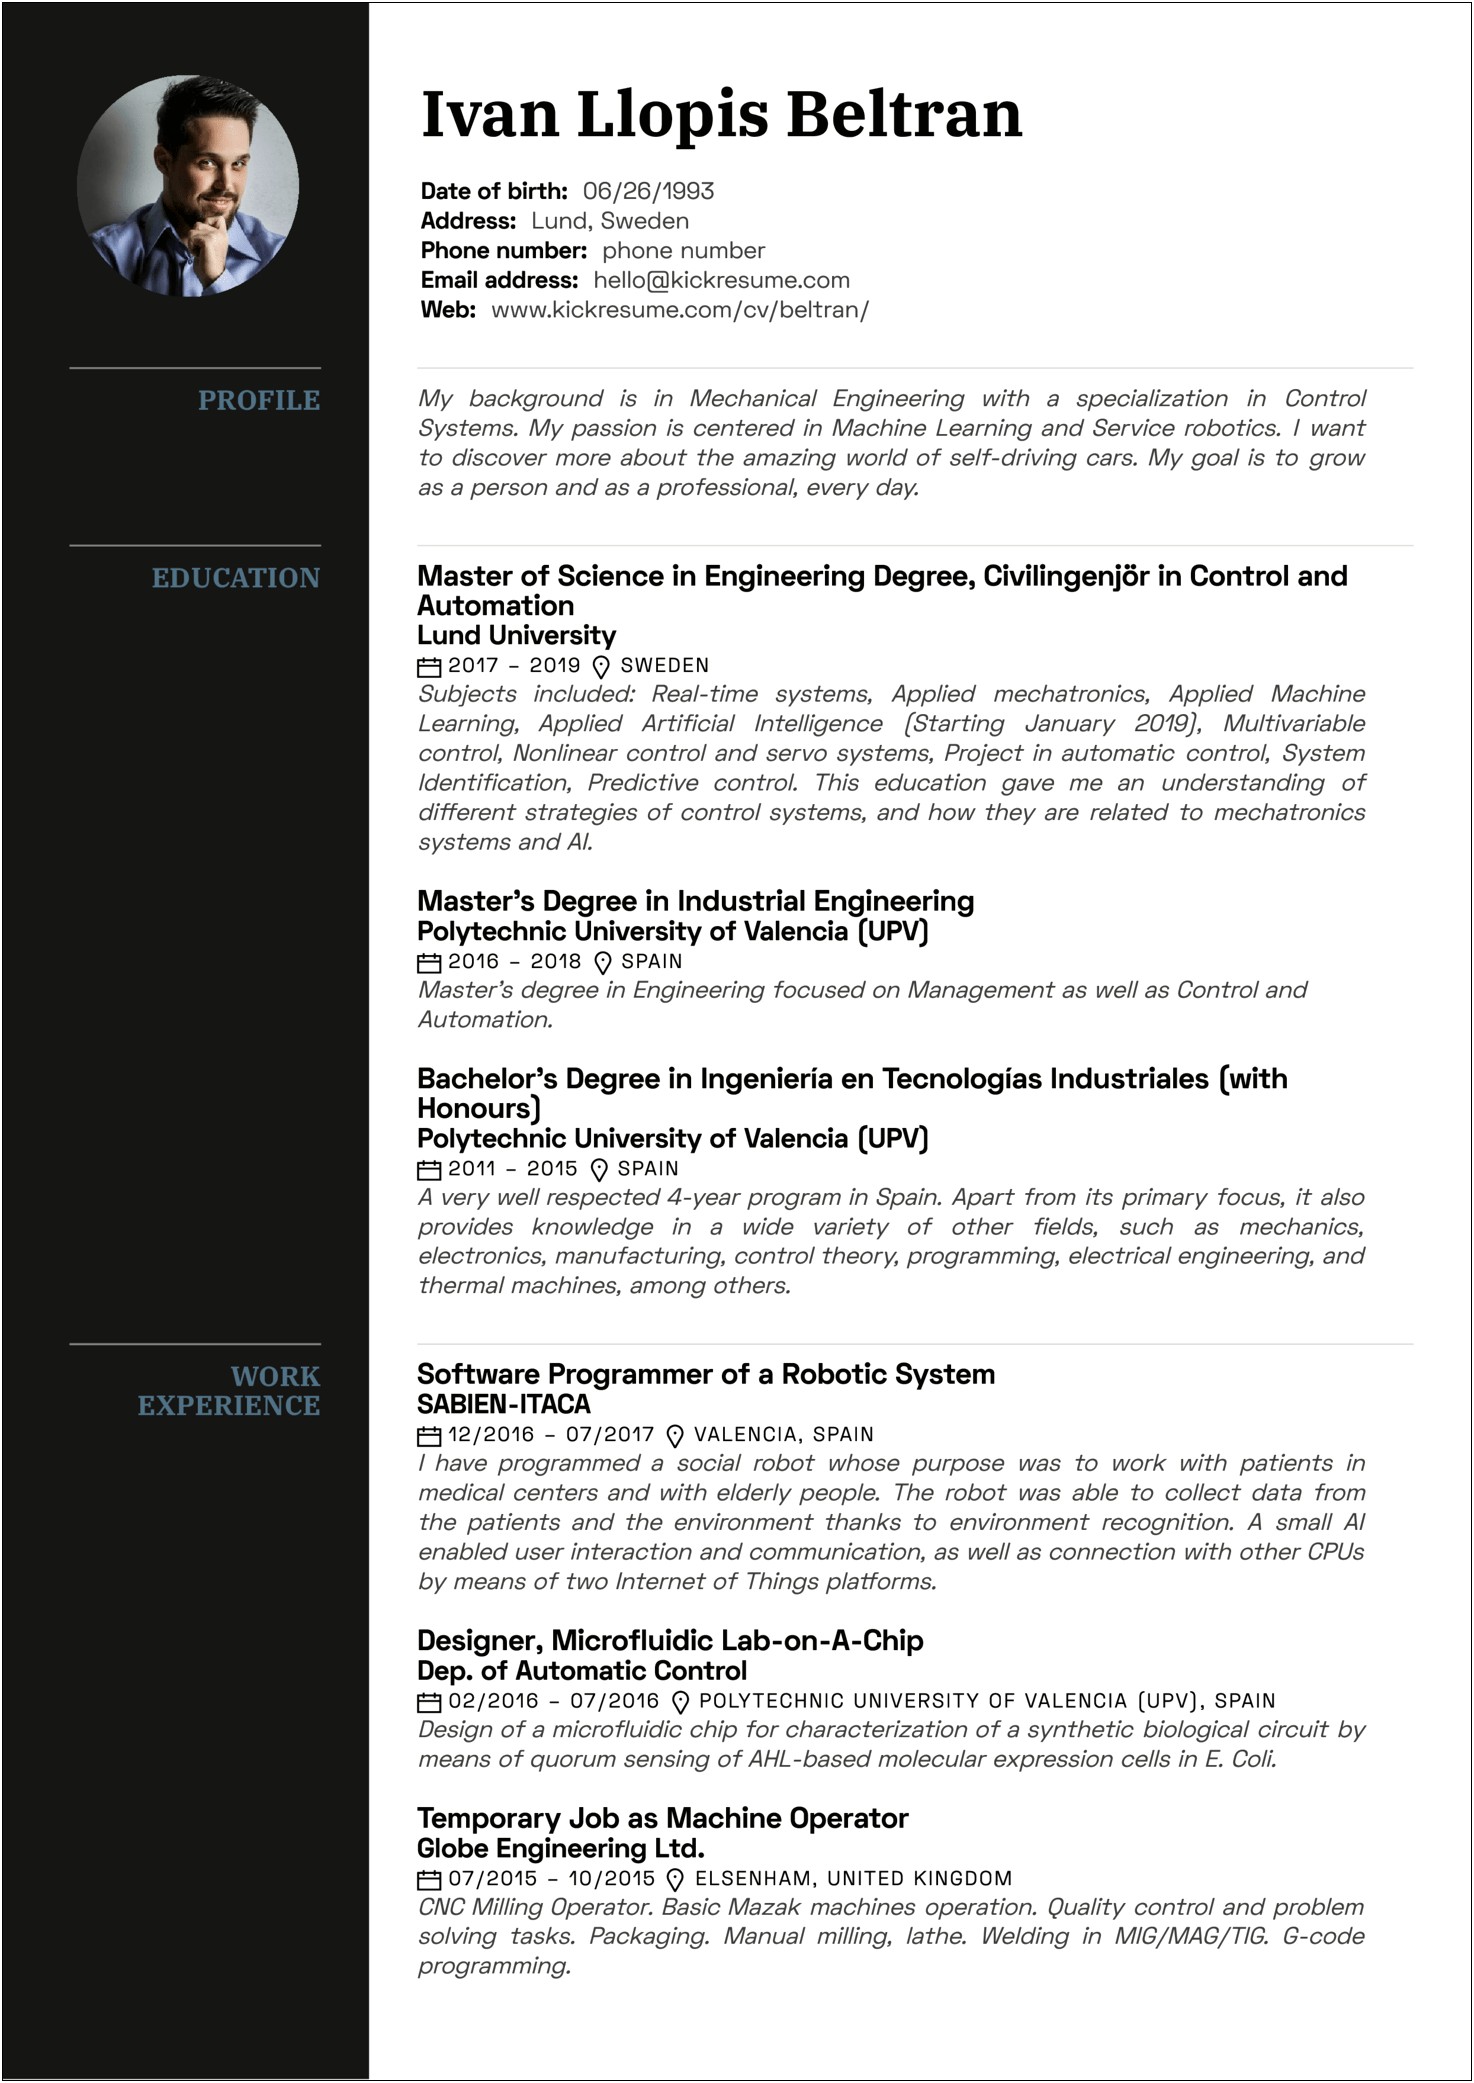 Mechanical Engineering Experience Resume Format Download